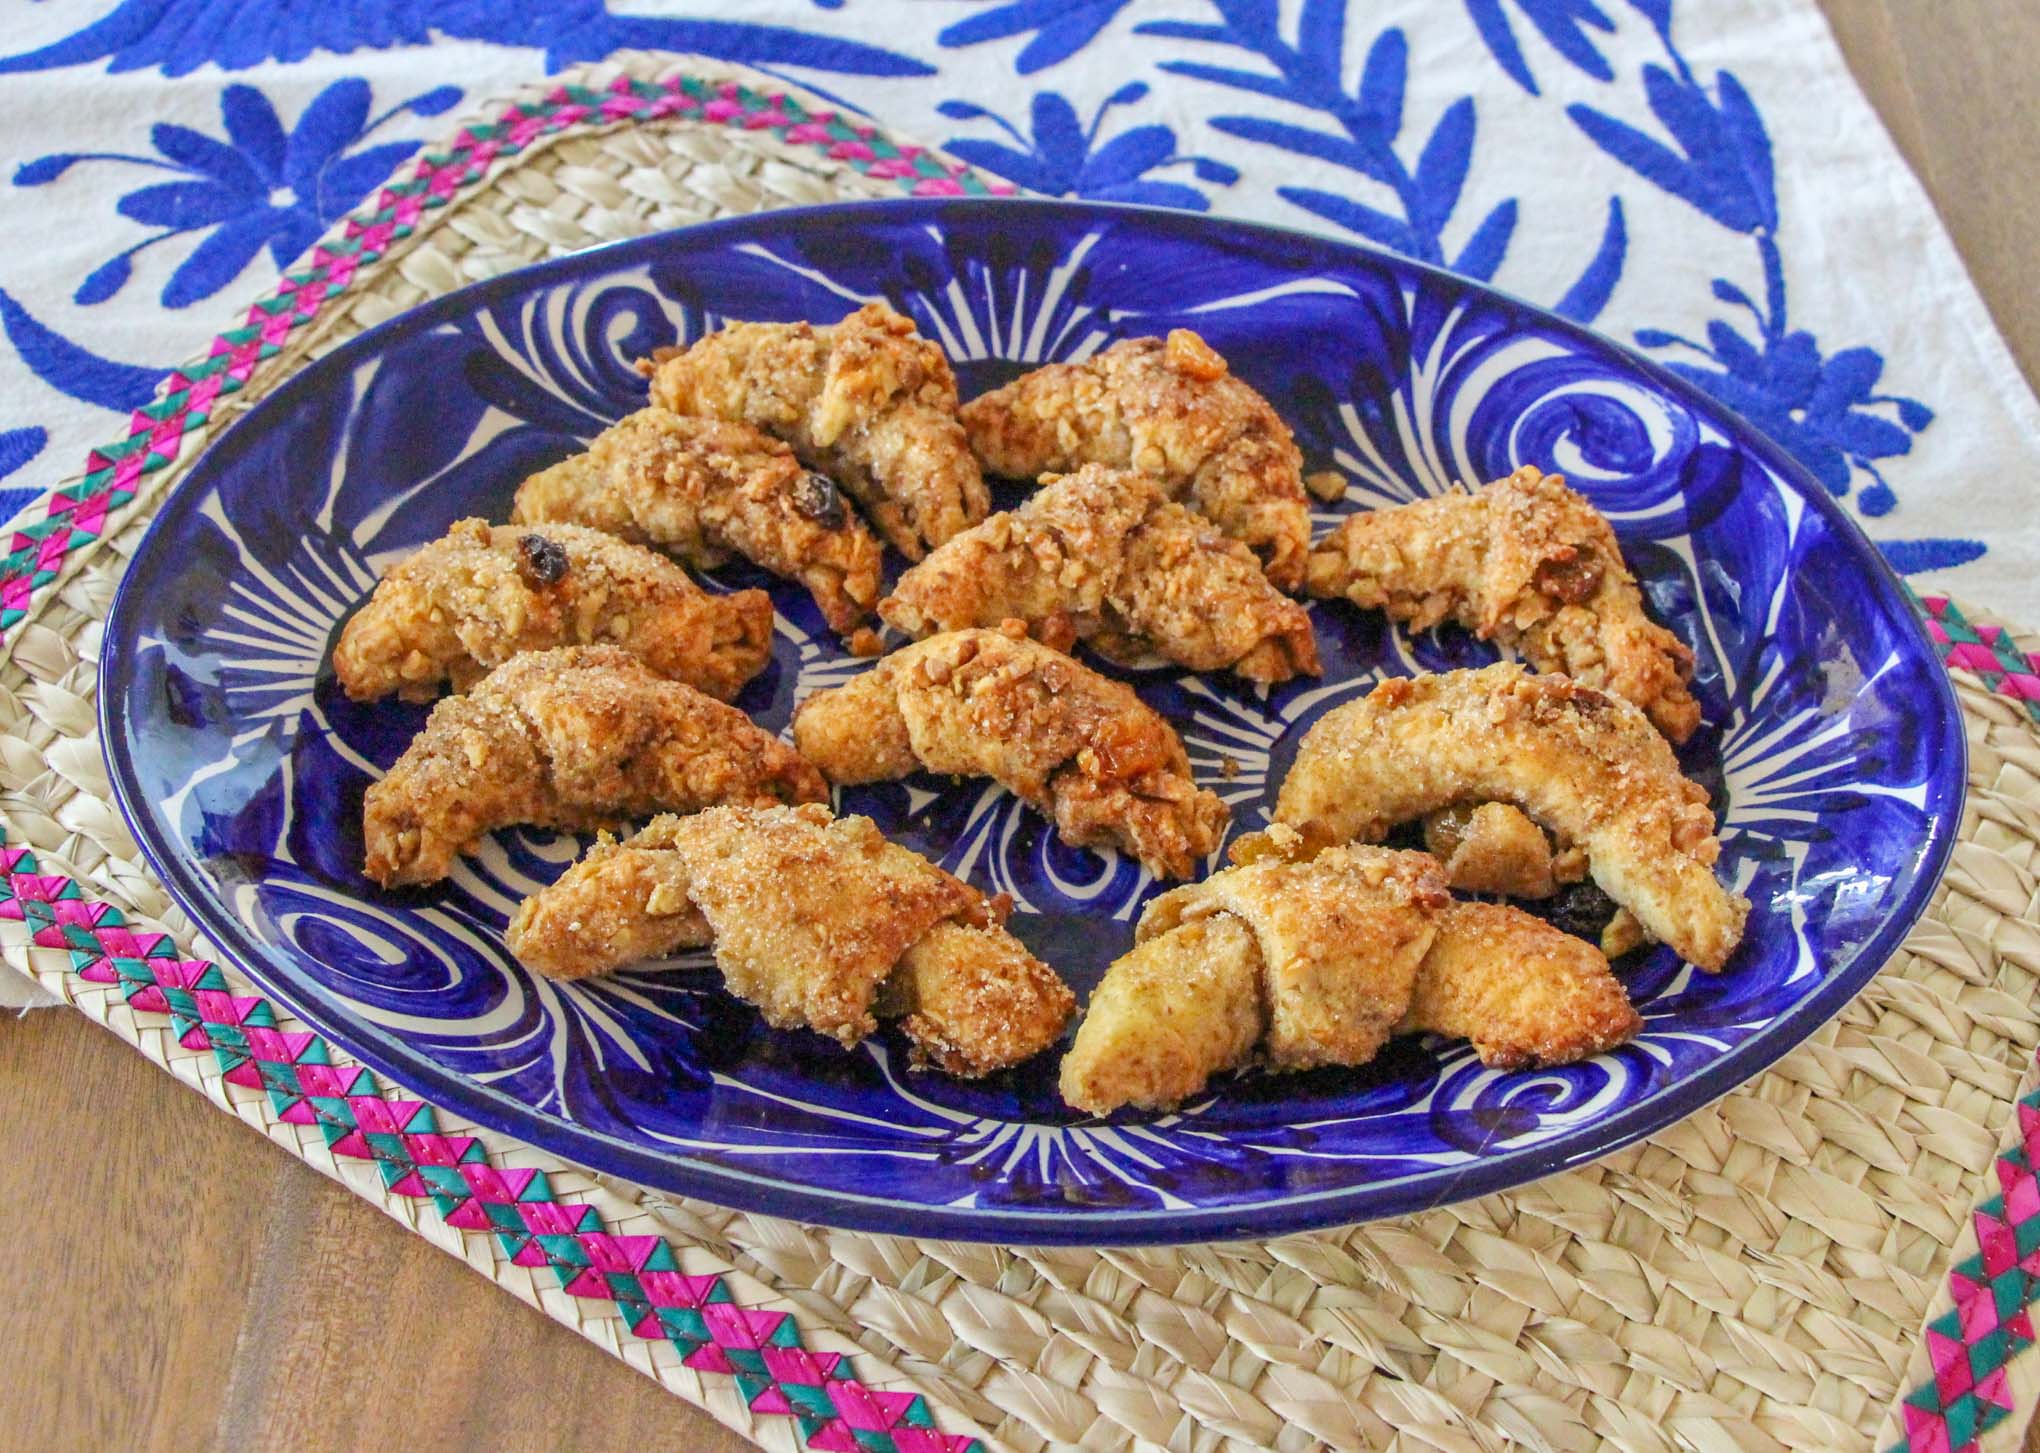 Safta’s Cinnamon Rugelach Recipe + 5 Fun Facts About the Jewish New Year